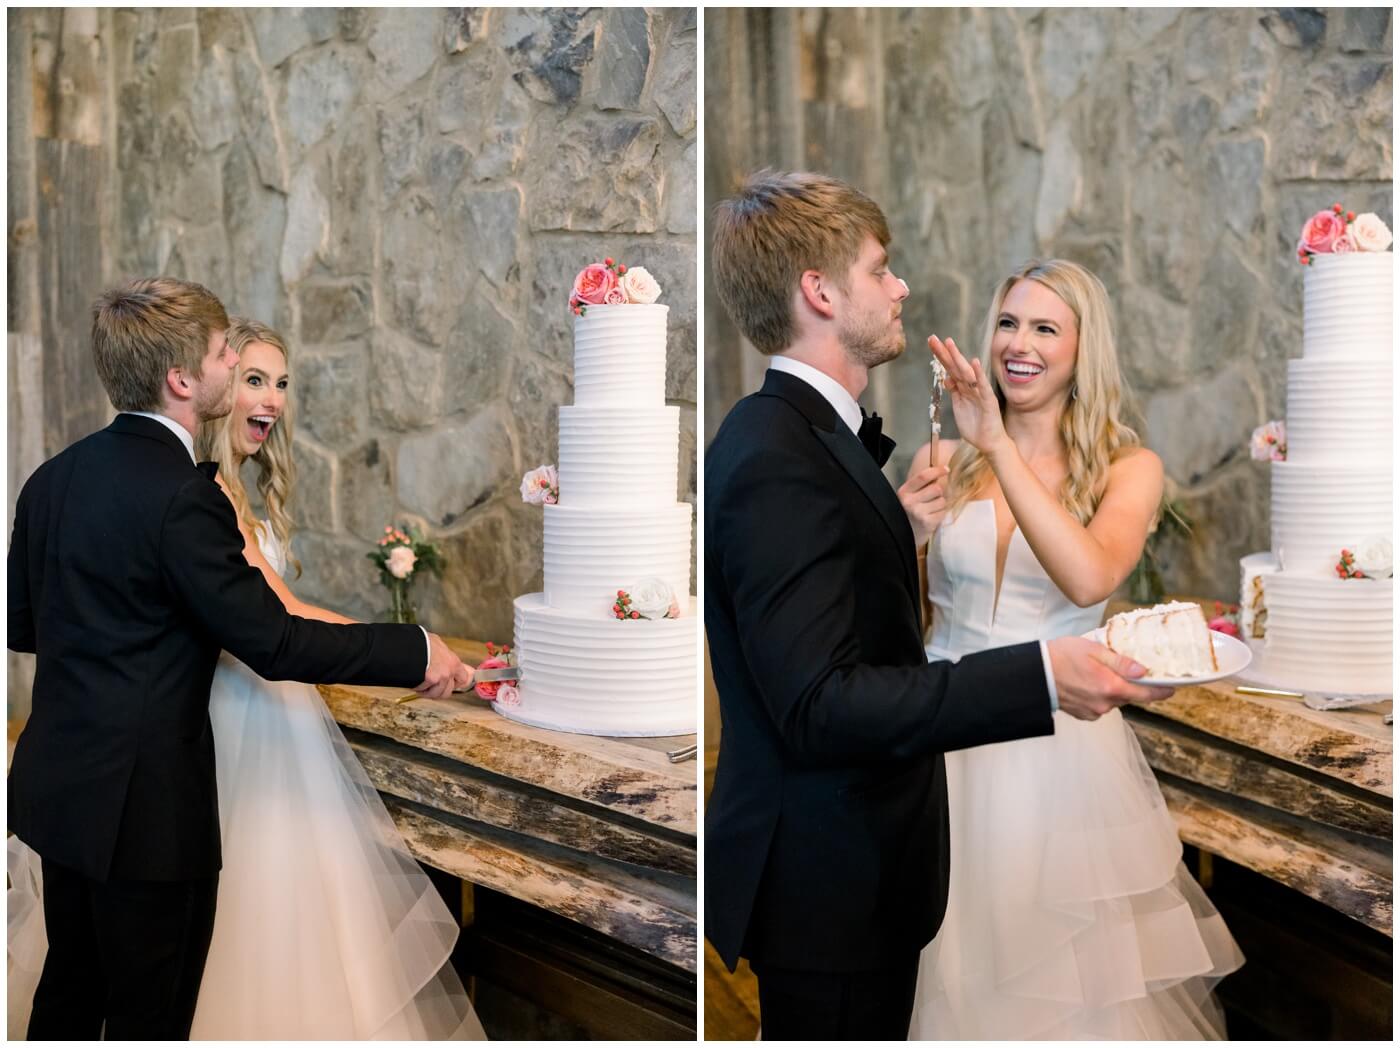 Bride and groom smile as they cut the cake